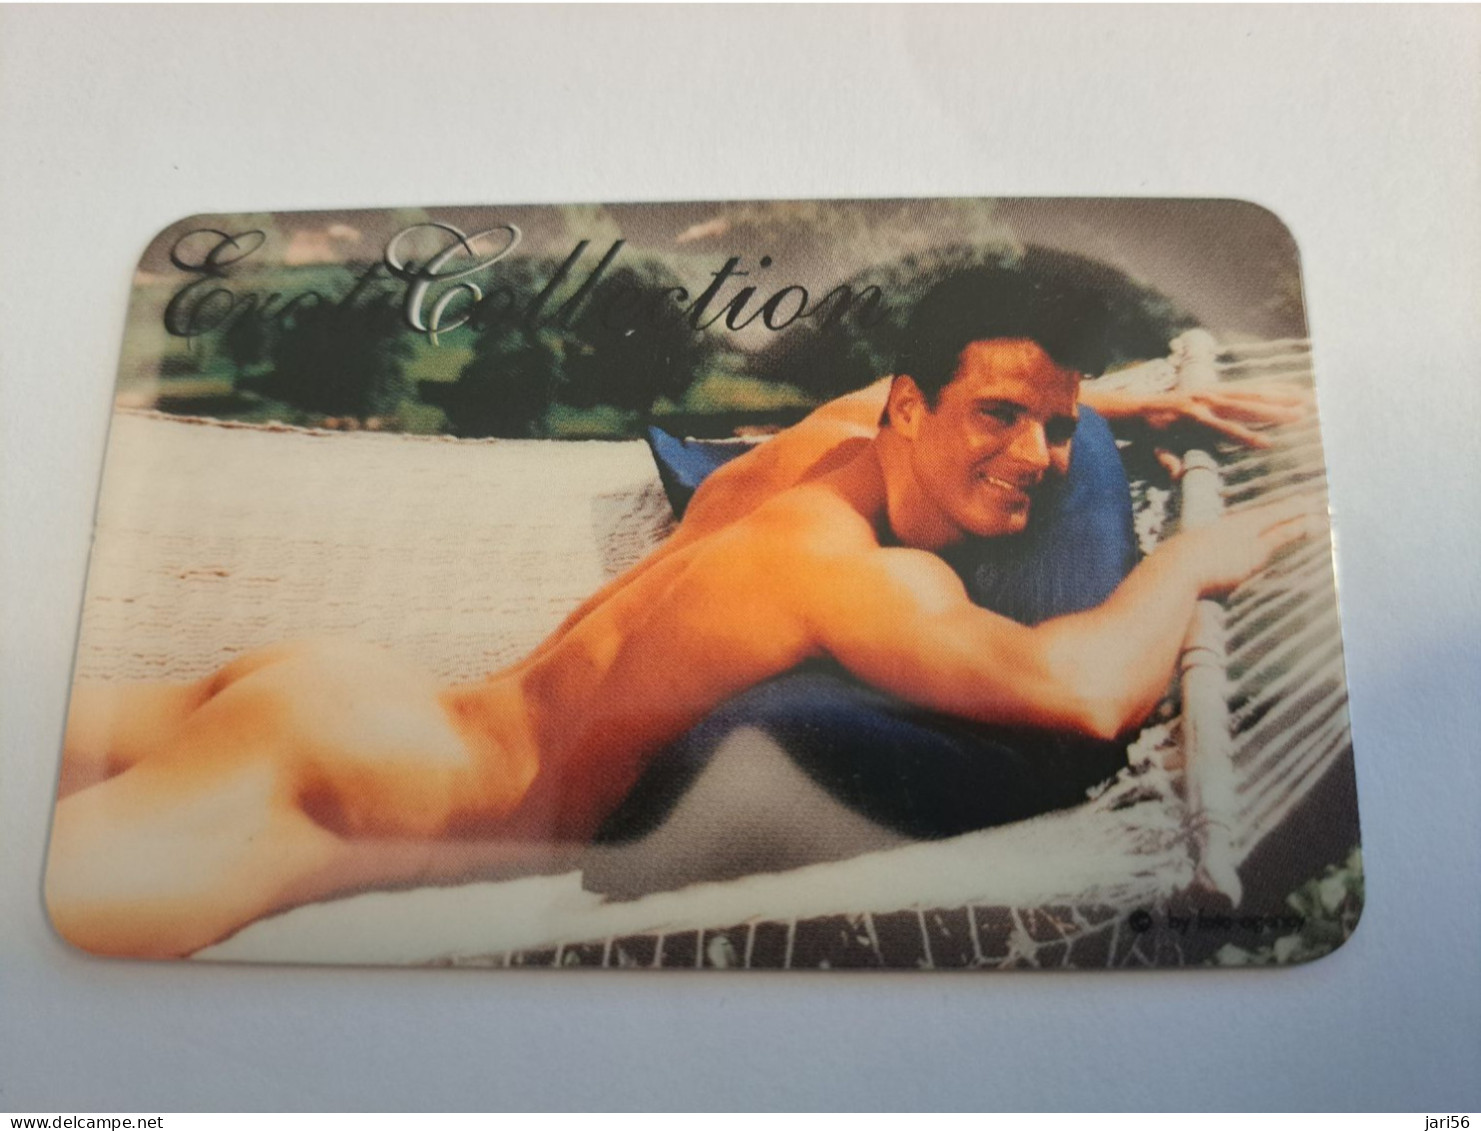 GREAT BRITAIN /20 UNITS / EROTIC COLLECTION / MODEL / NAKED MAN  / (date 09/00)  PREPAID CARD / MINT  **15905** - [10] Colecciones